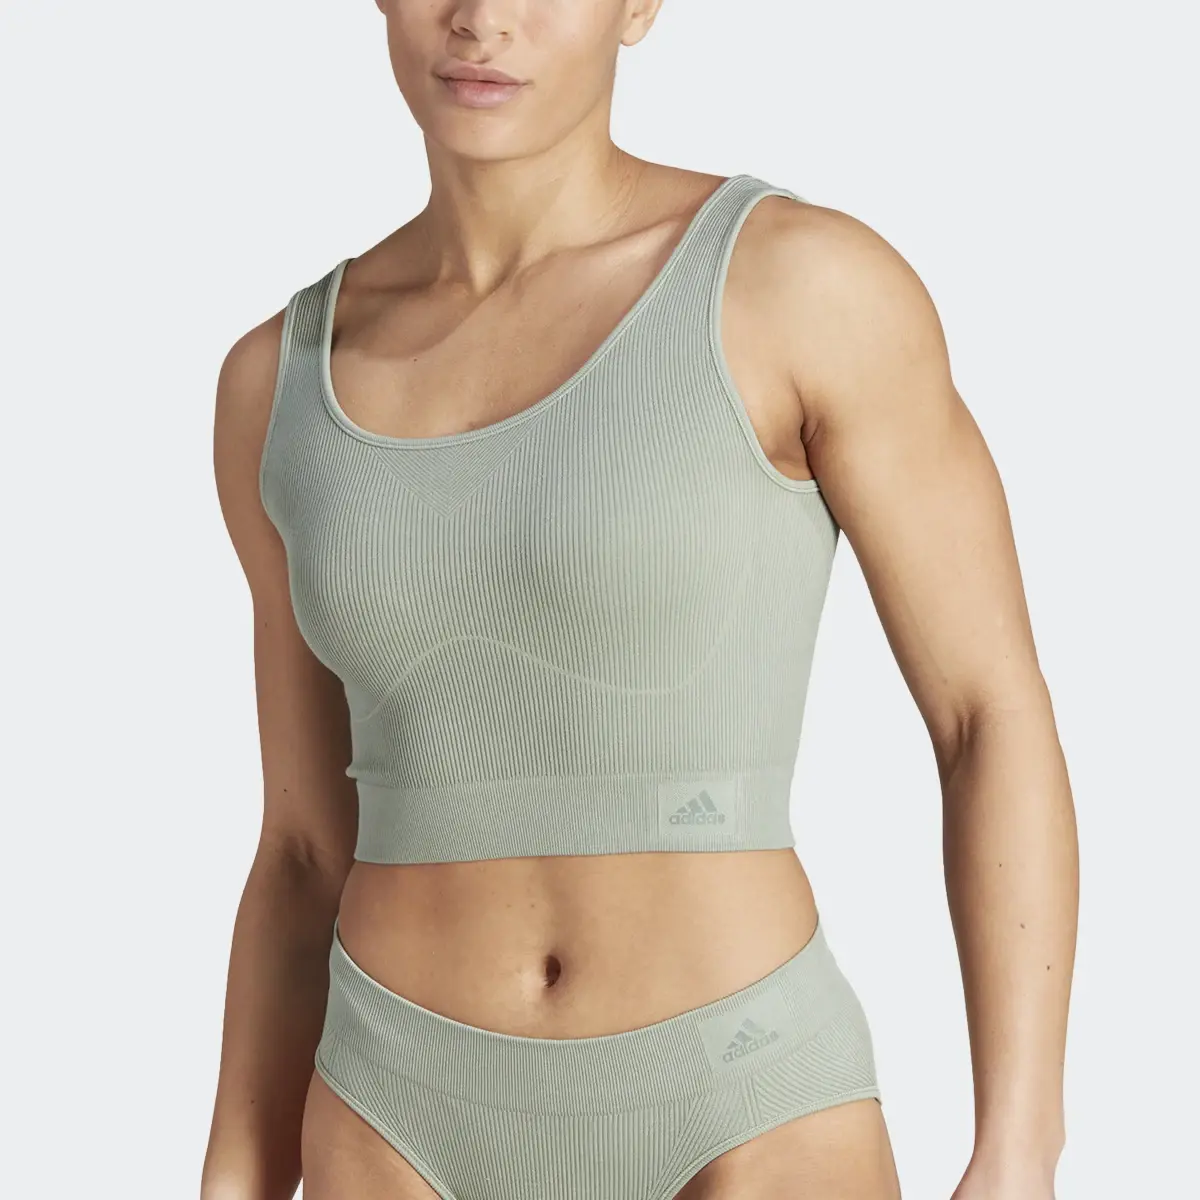 Adidas Ribbed Active Seamless Cropped Tank Top Underwear. 1